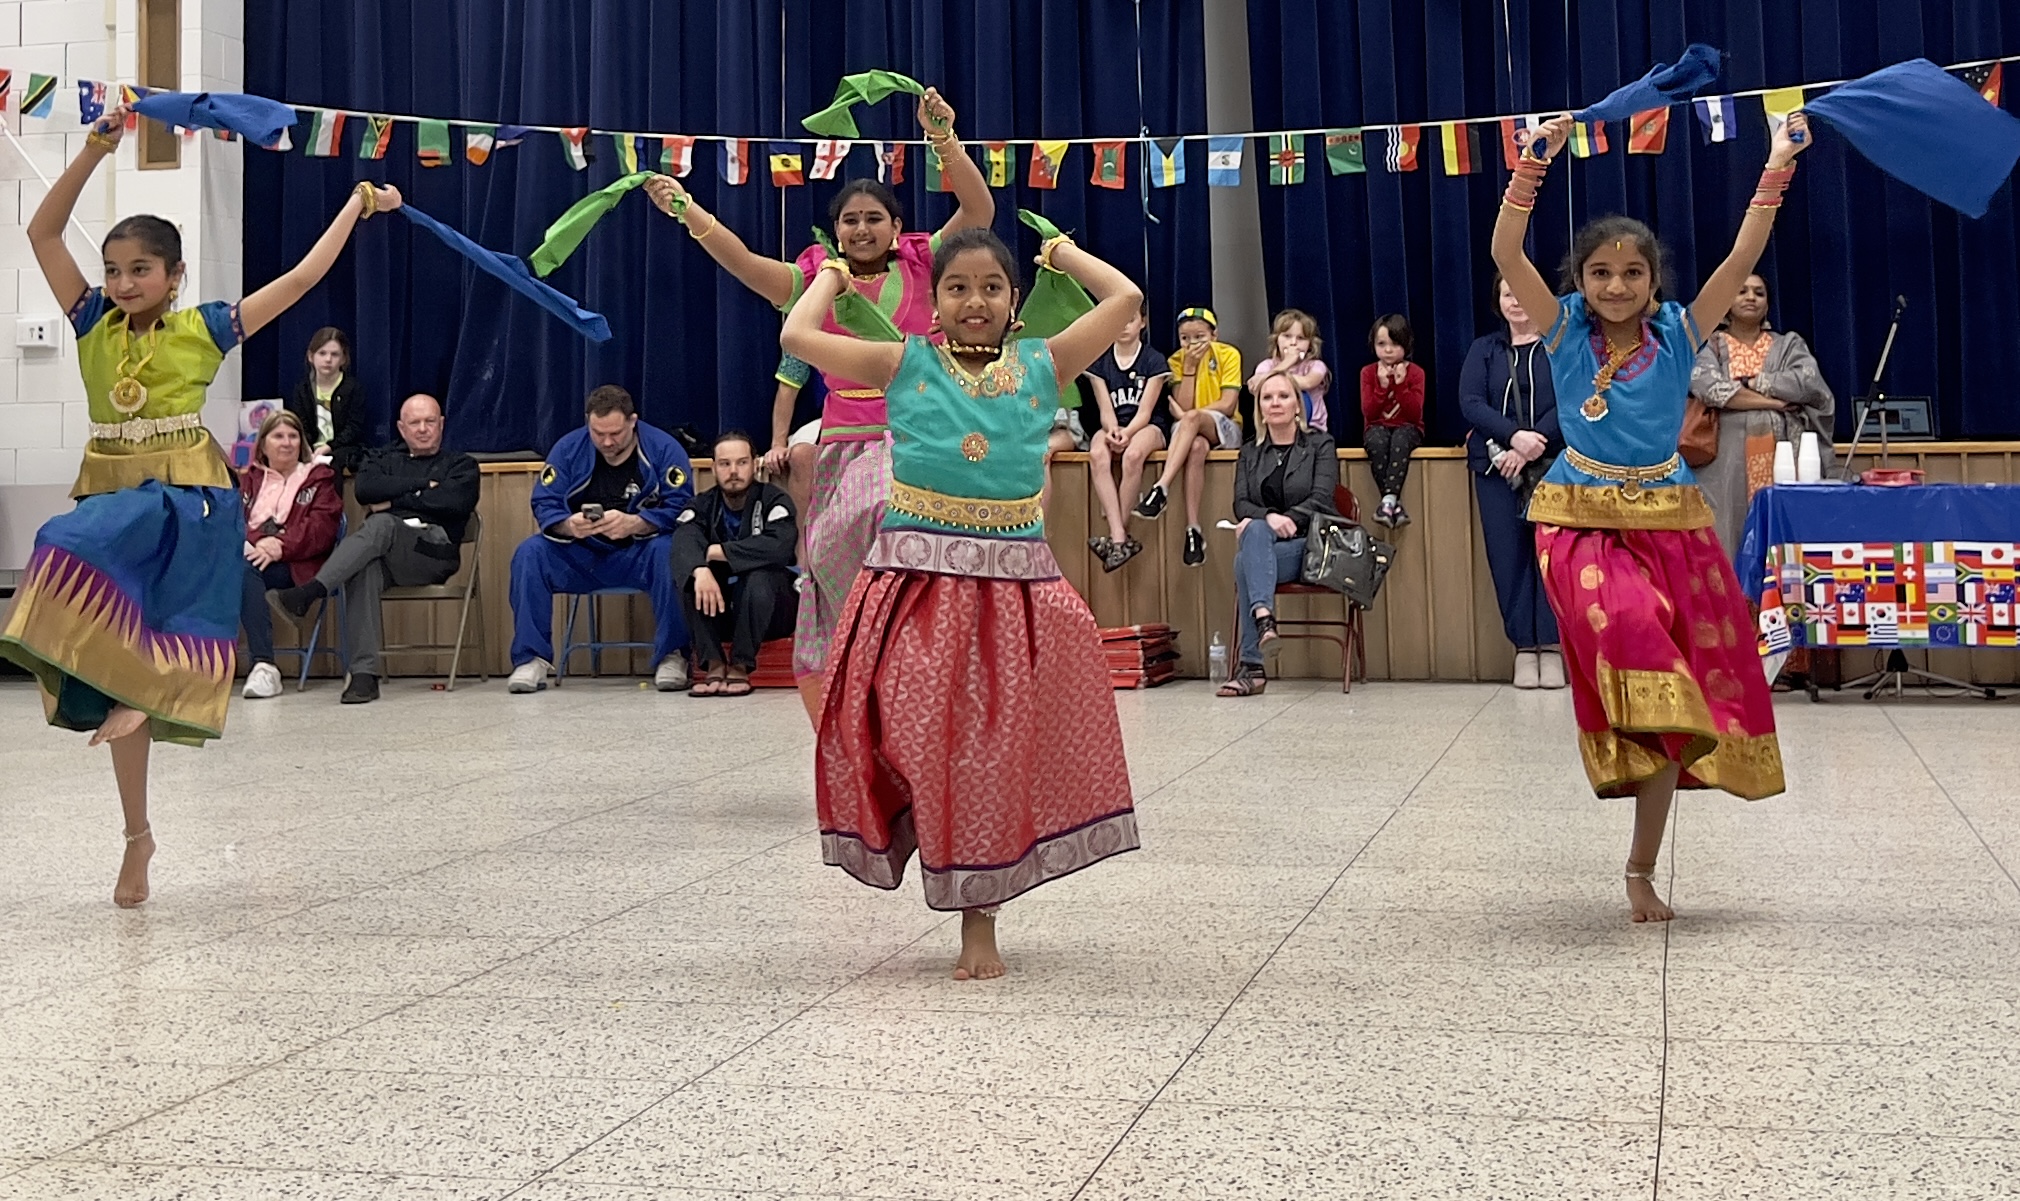 Four LES students wearing brightly colored traditional clothes from their culture dance in the LES gym at the International Night event.